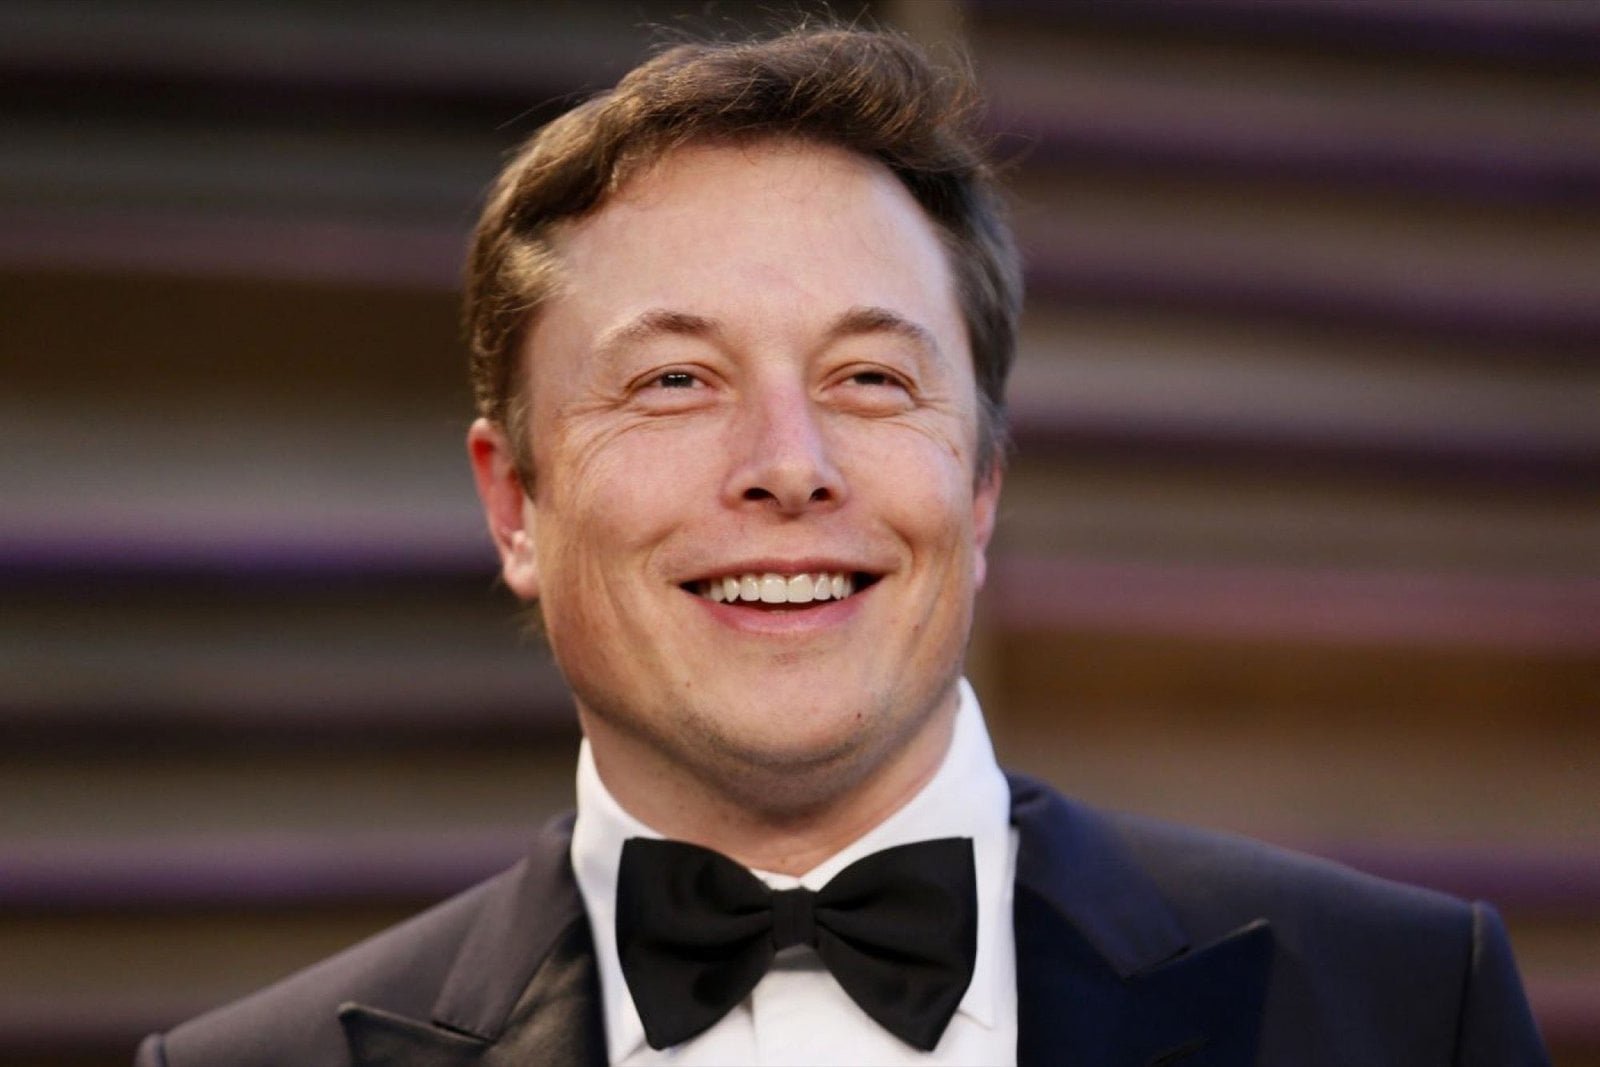 spacex-employees-say-they-were-fired-for-criticizing-elon-musk-in-open-letter